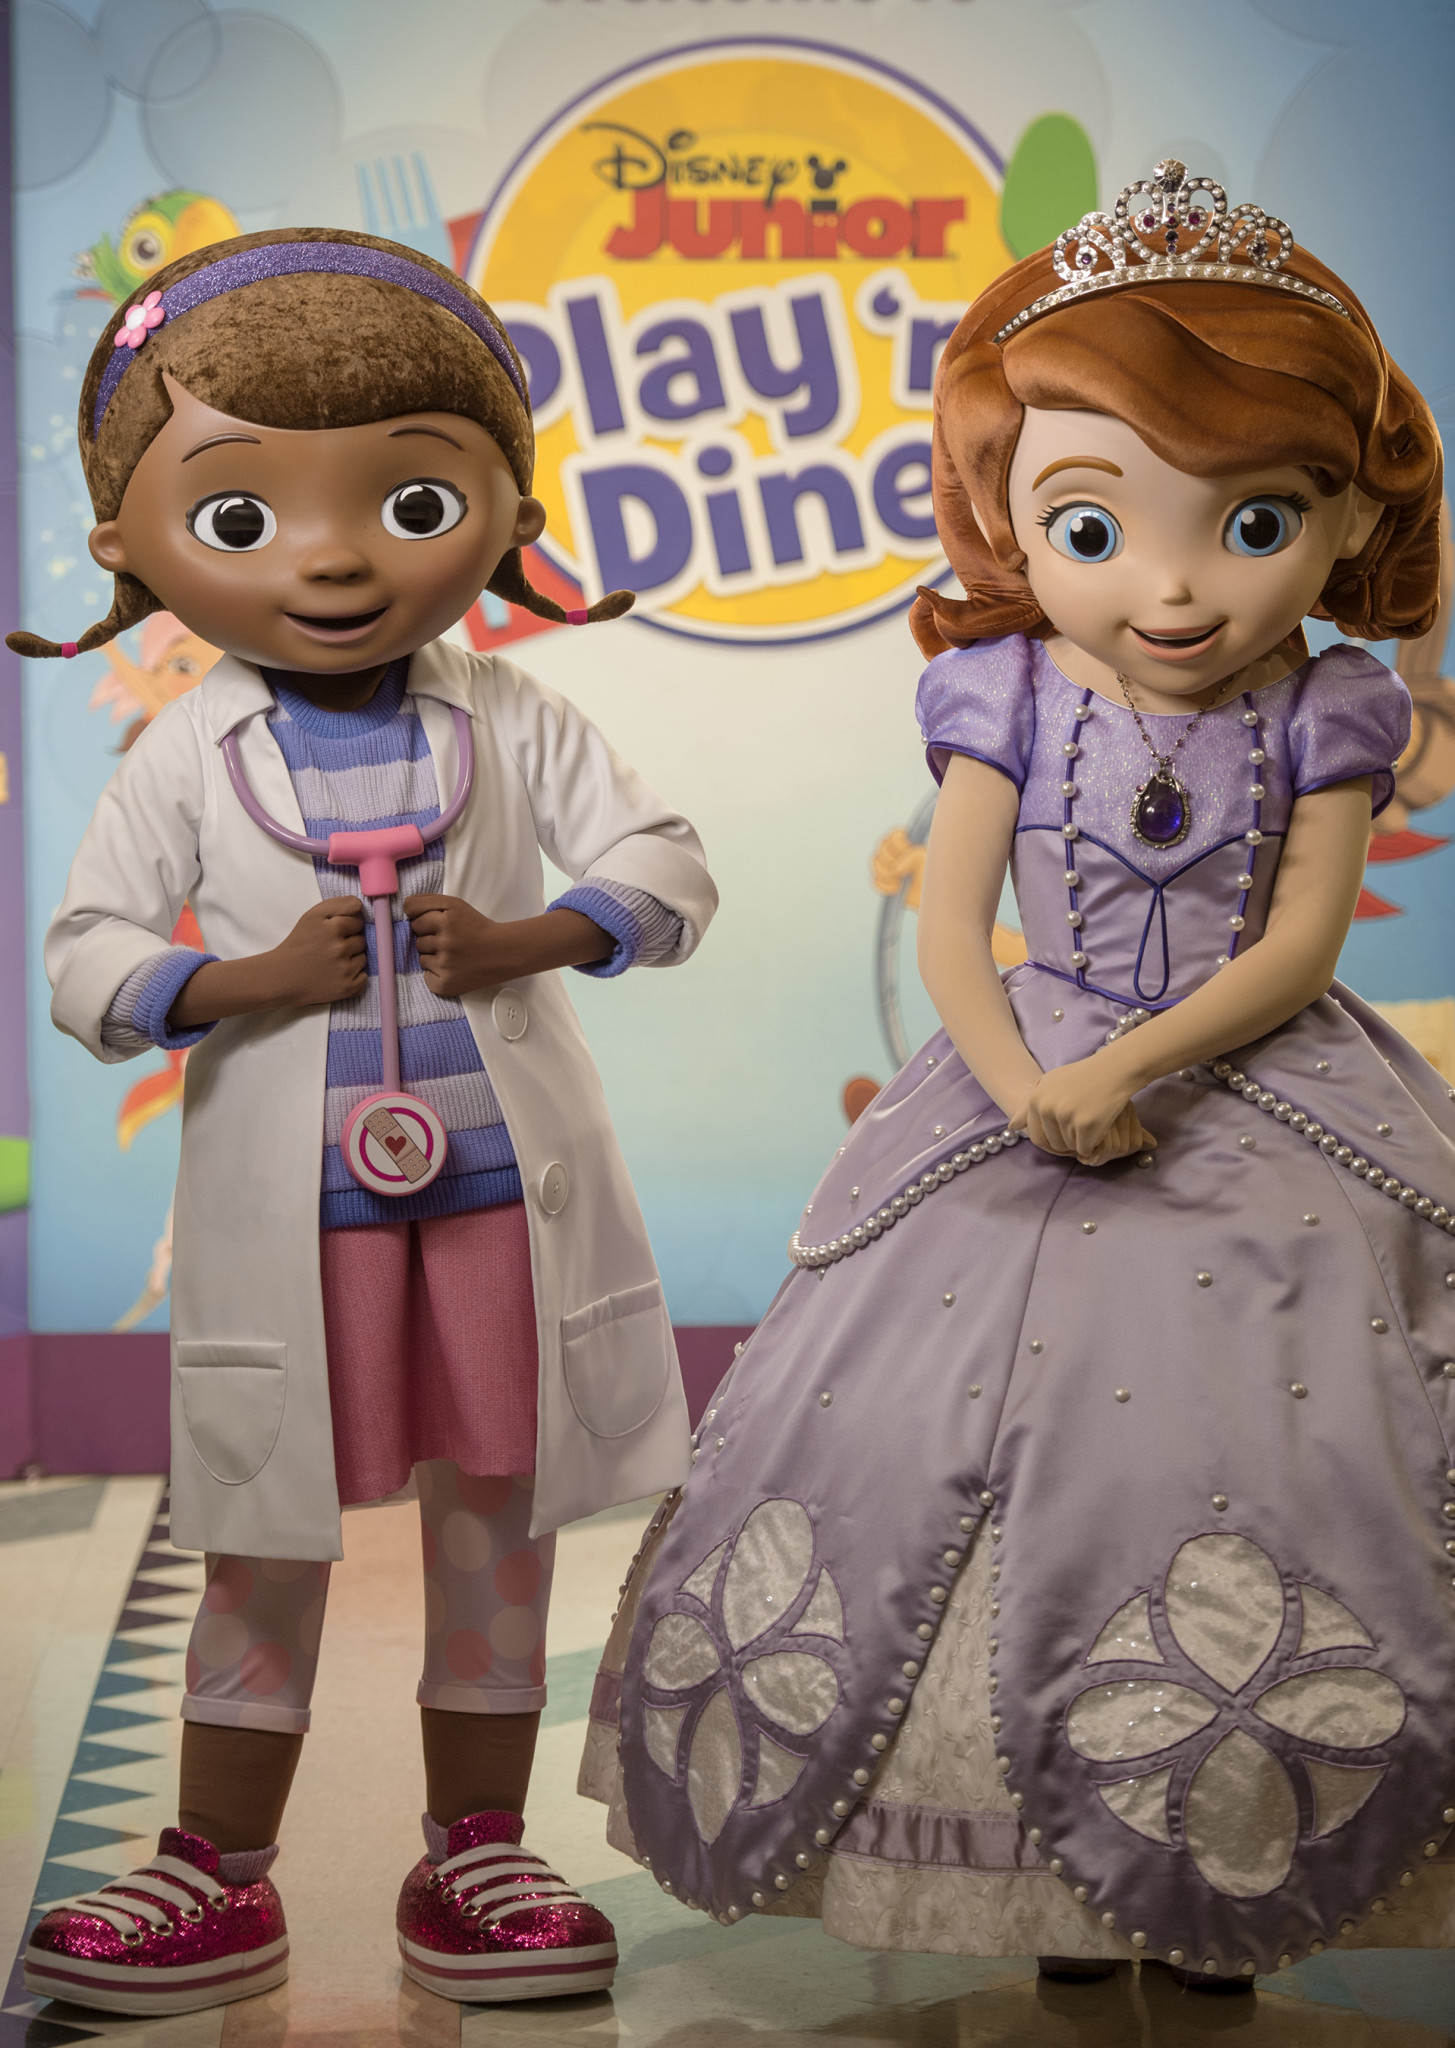 Disney Junior Play ’n Dine Is Like a Dream Come True for Little Ones